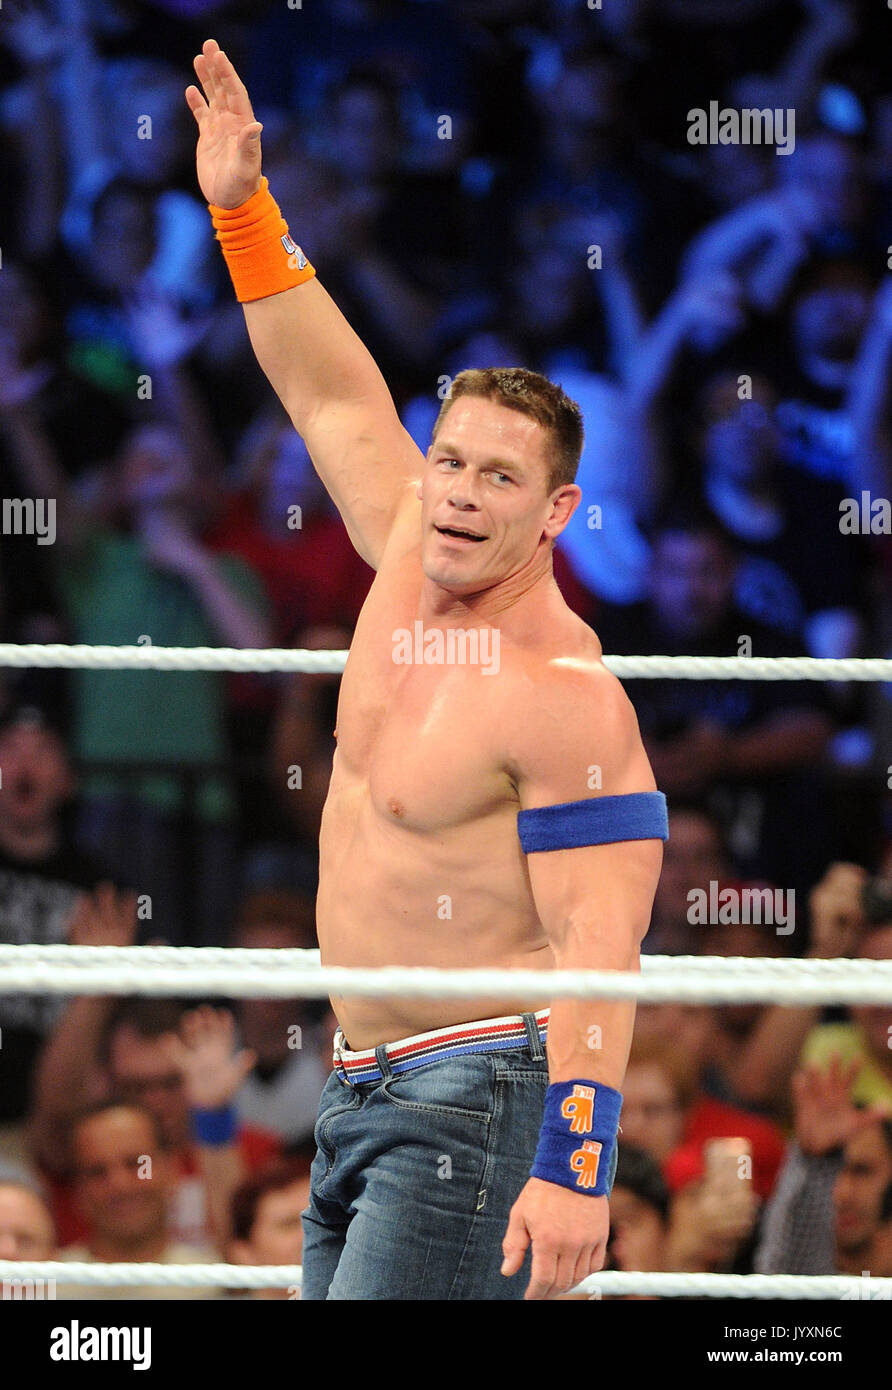 Brooklyn, NY, USA. 20th Aug, 2017. Actor and WWE Superstar John Cena defeated Baron Corbin on August 20, 2017 at the Barclays Center in Brooklyn, New York as part of the WWE SummerSlam event. Credit: George Napolitano/Media Punch/Alamy Live News Stock Photo